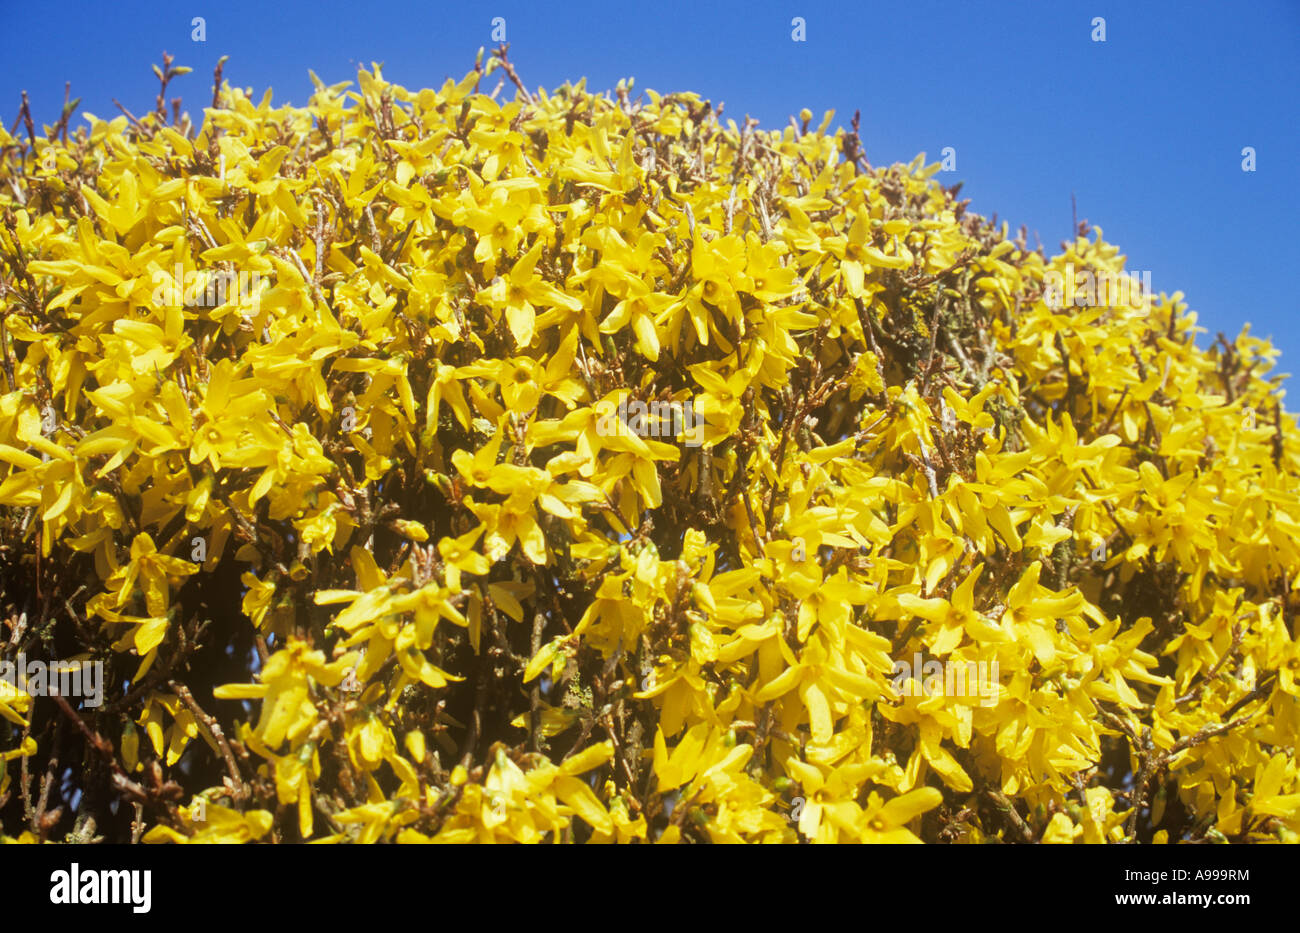 Rounded top of flowering shrub Forsythia intermedia Spectabilis with its mass of leafless yellow flowers under blue sky Stock Photo